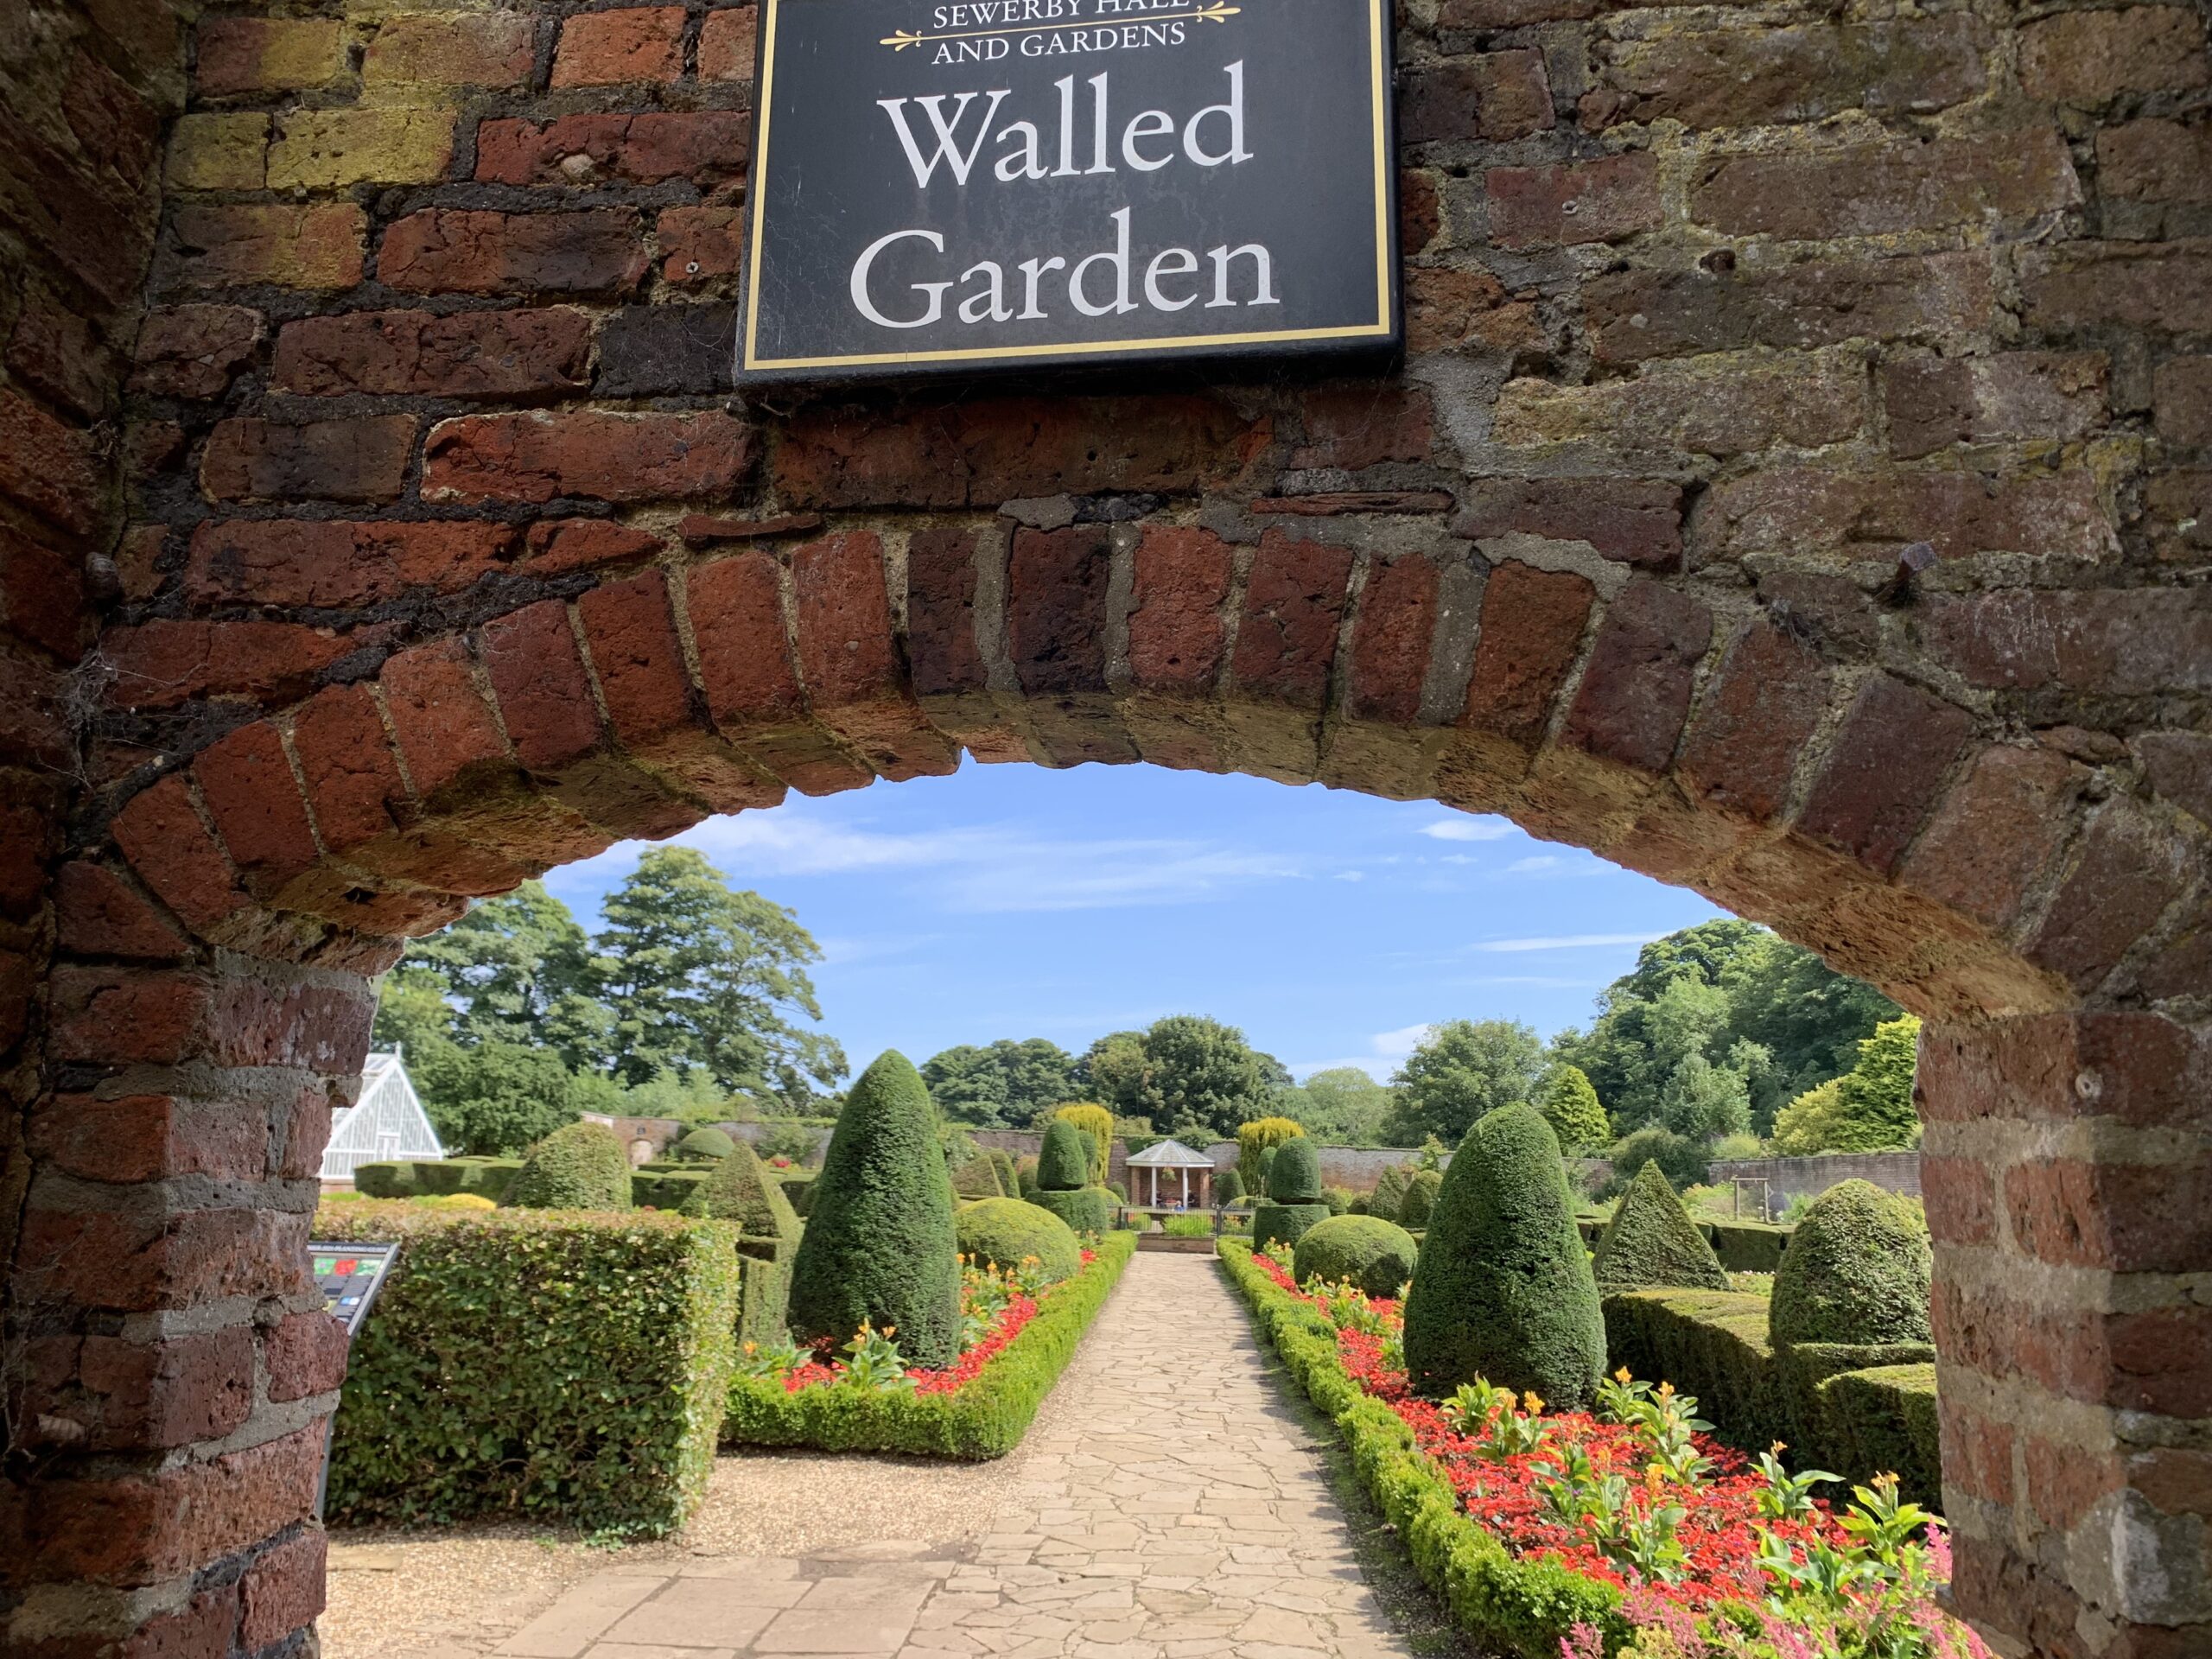 Walled garden in Sewerby hall